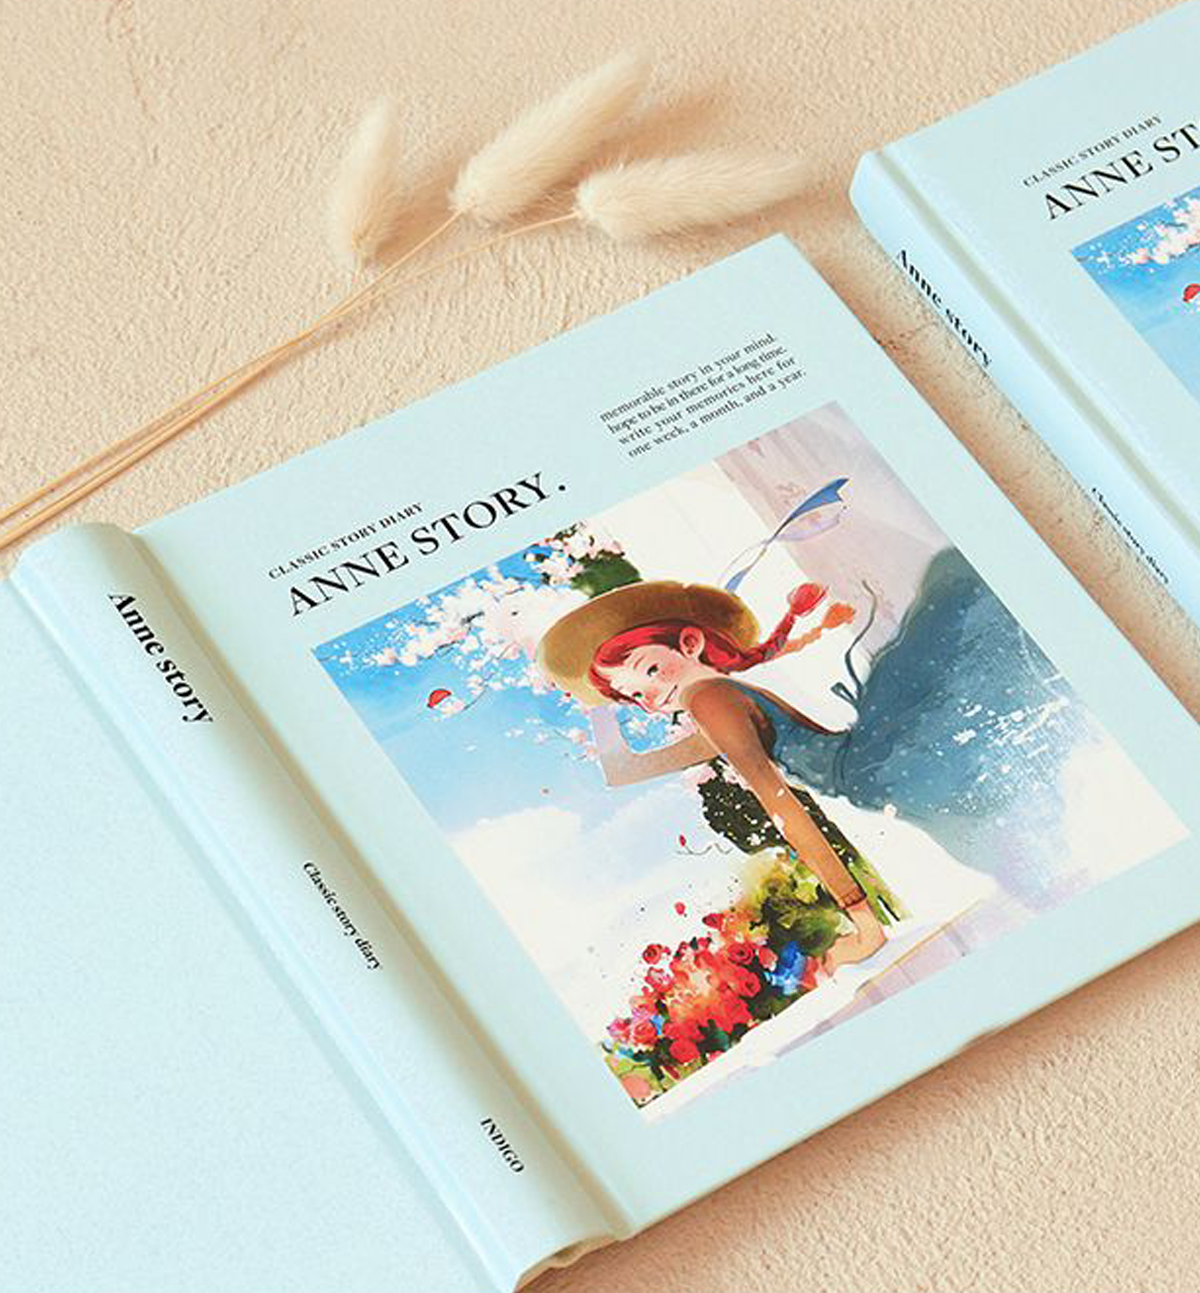 Anne Of Green Gables Story Weekly Planner